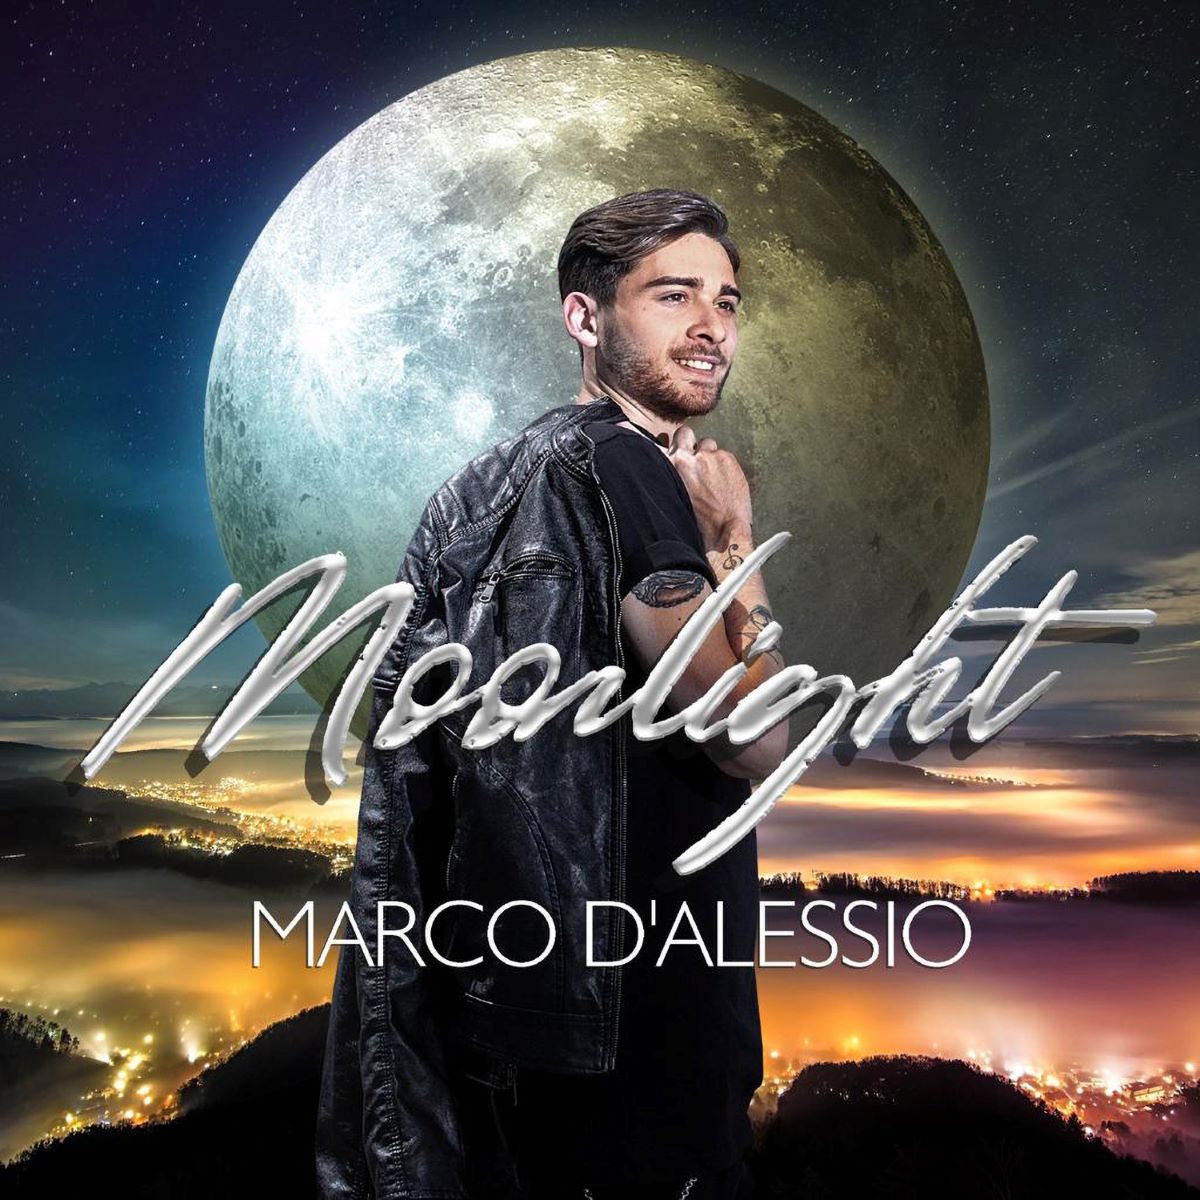 Marco D’Alessio - “Moonlight”